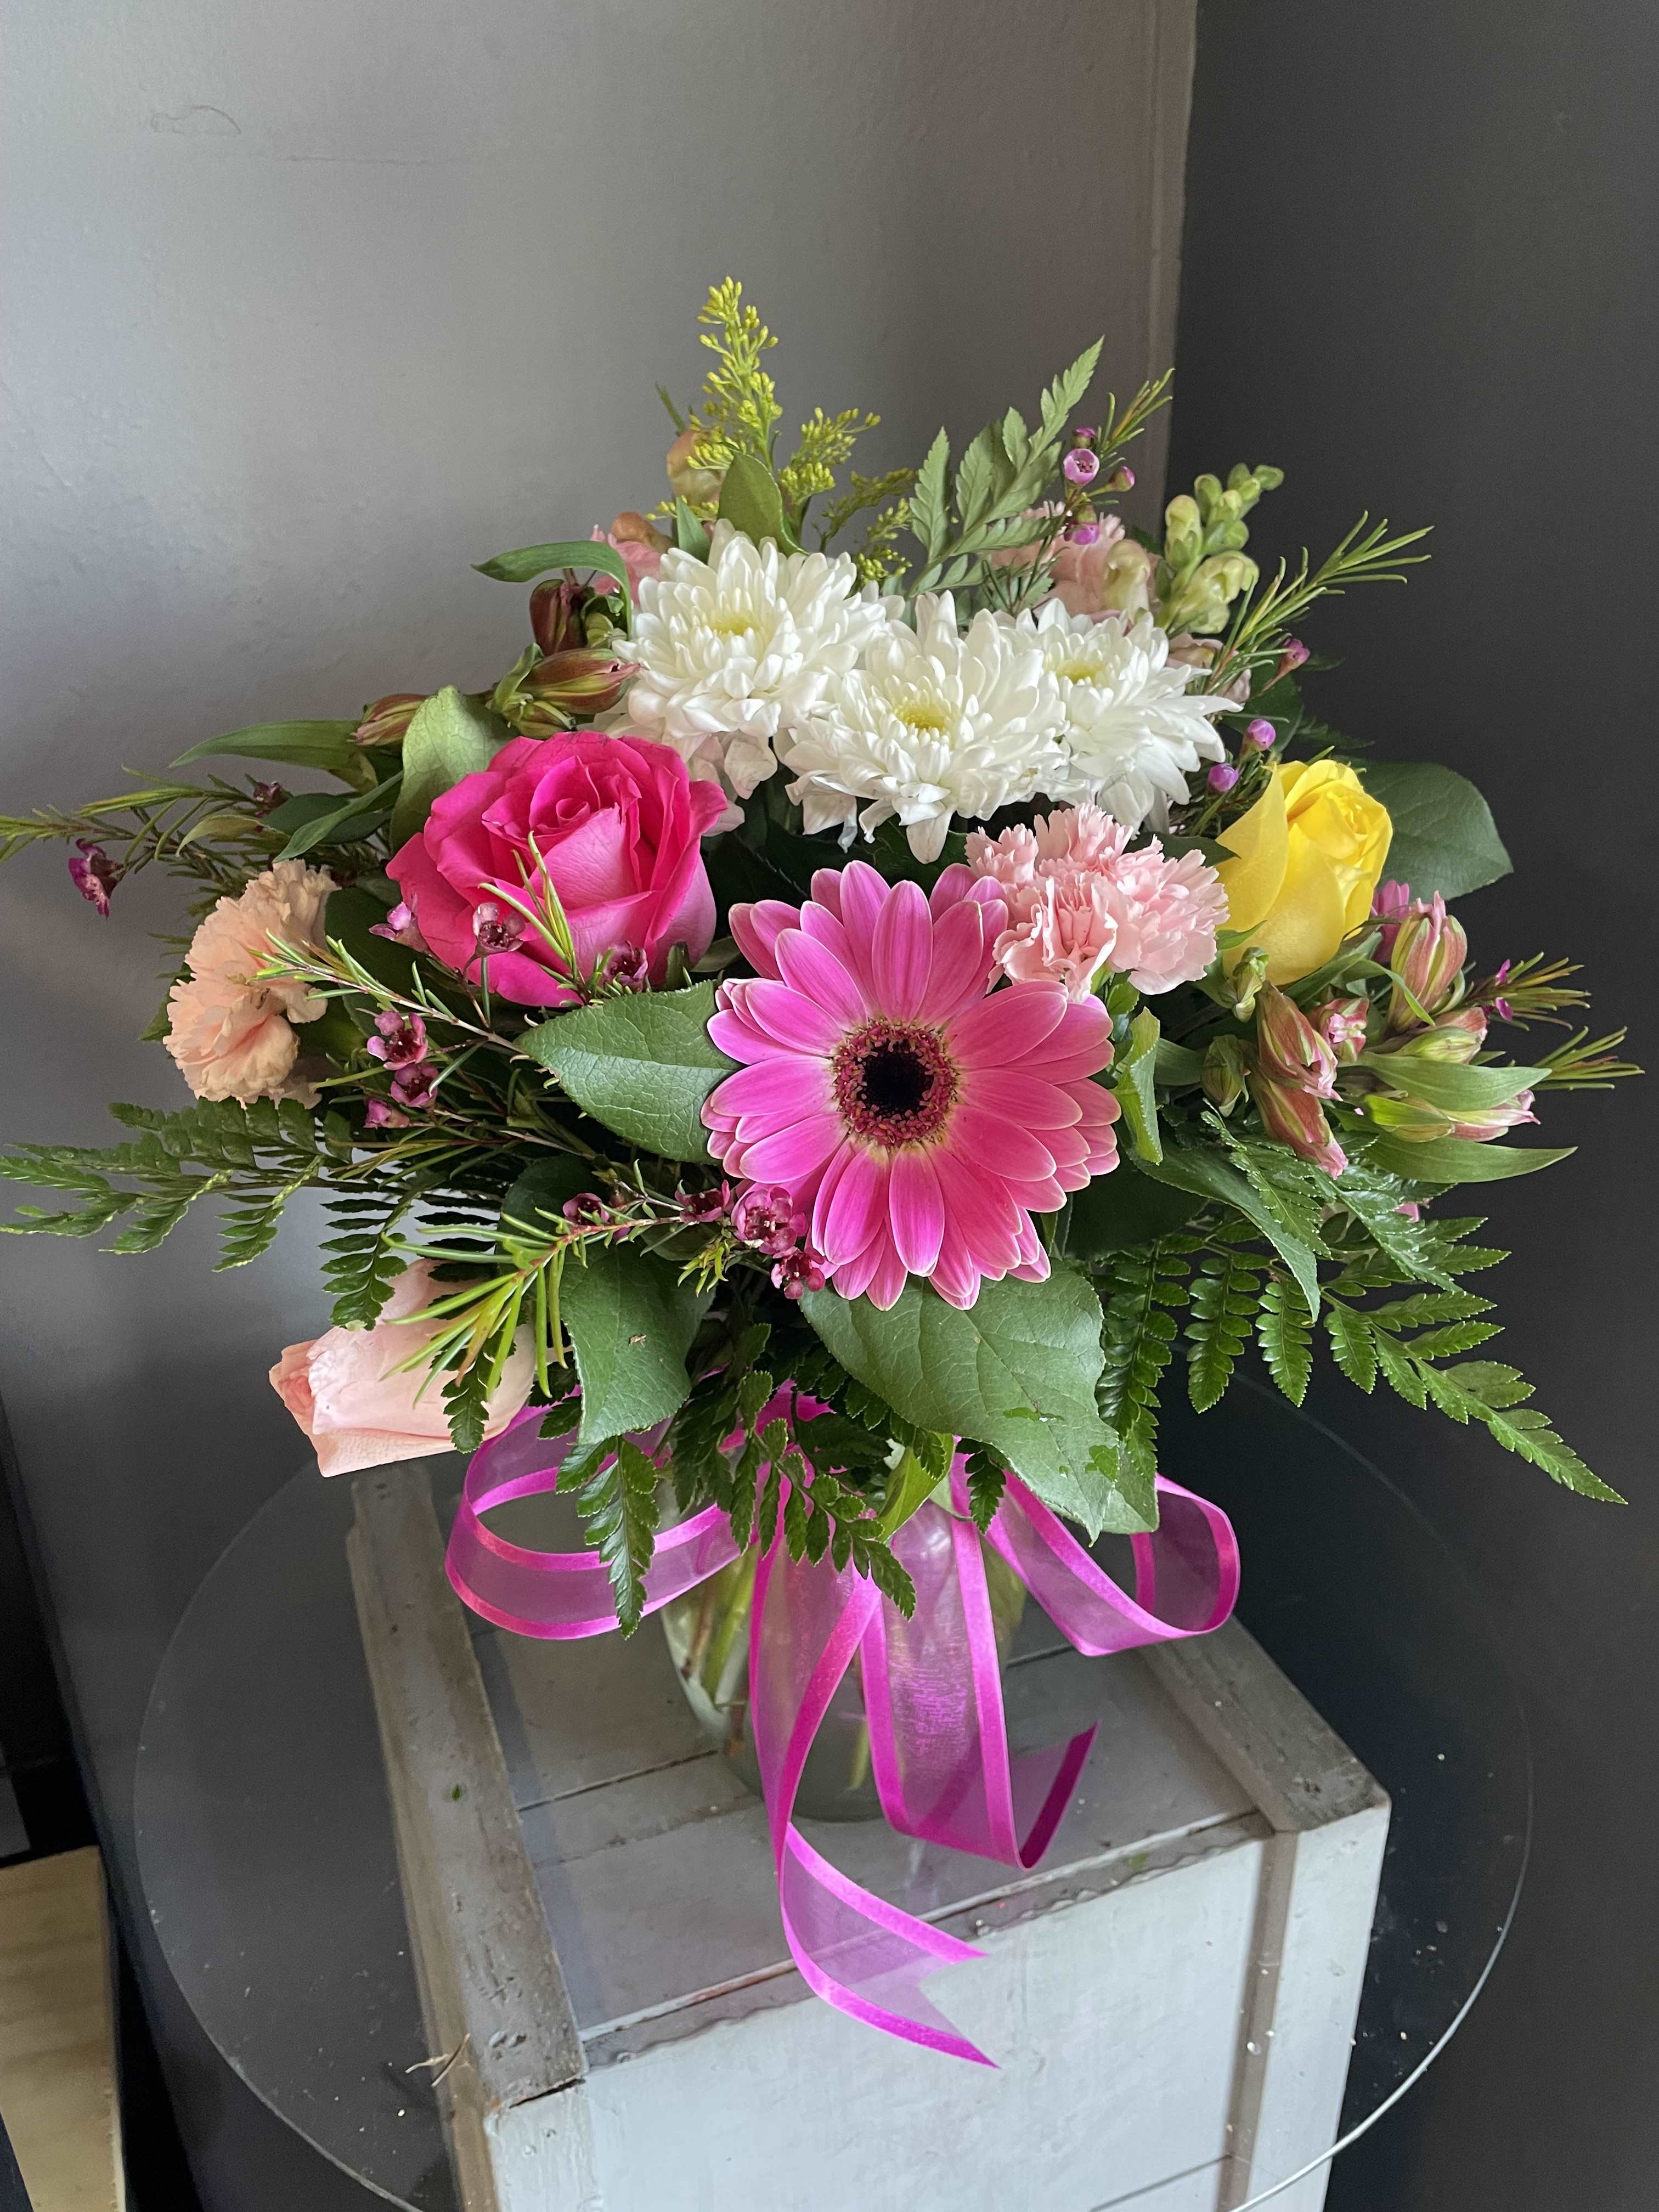 # 109 Spring Floral Arrangement - A beautifully selected bunch of the freshest flowers in a vase uniquely arranged by hand. 